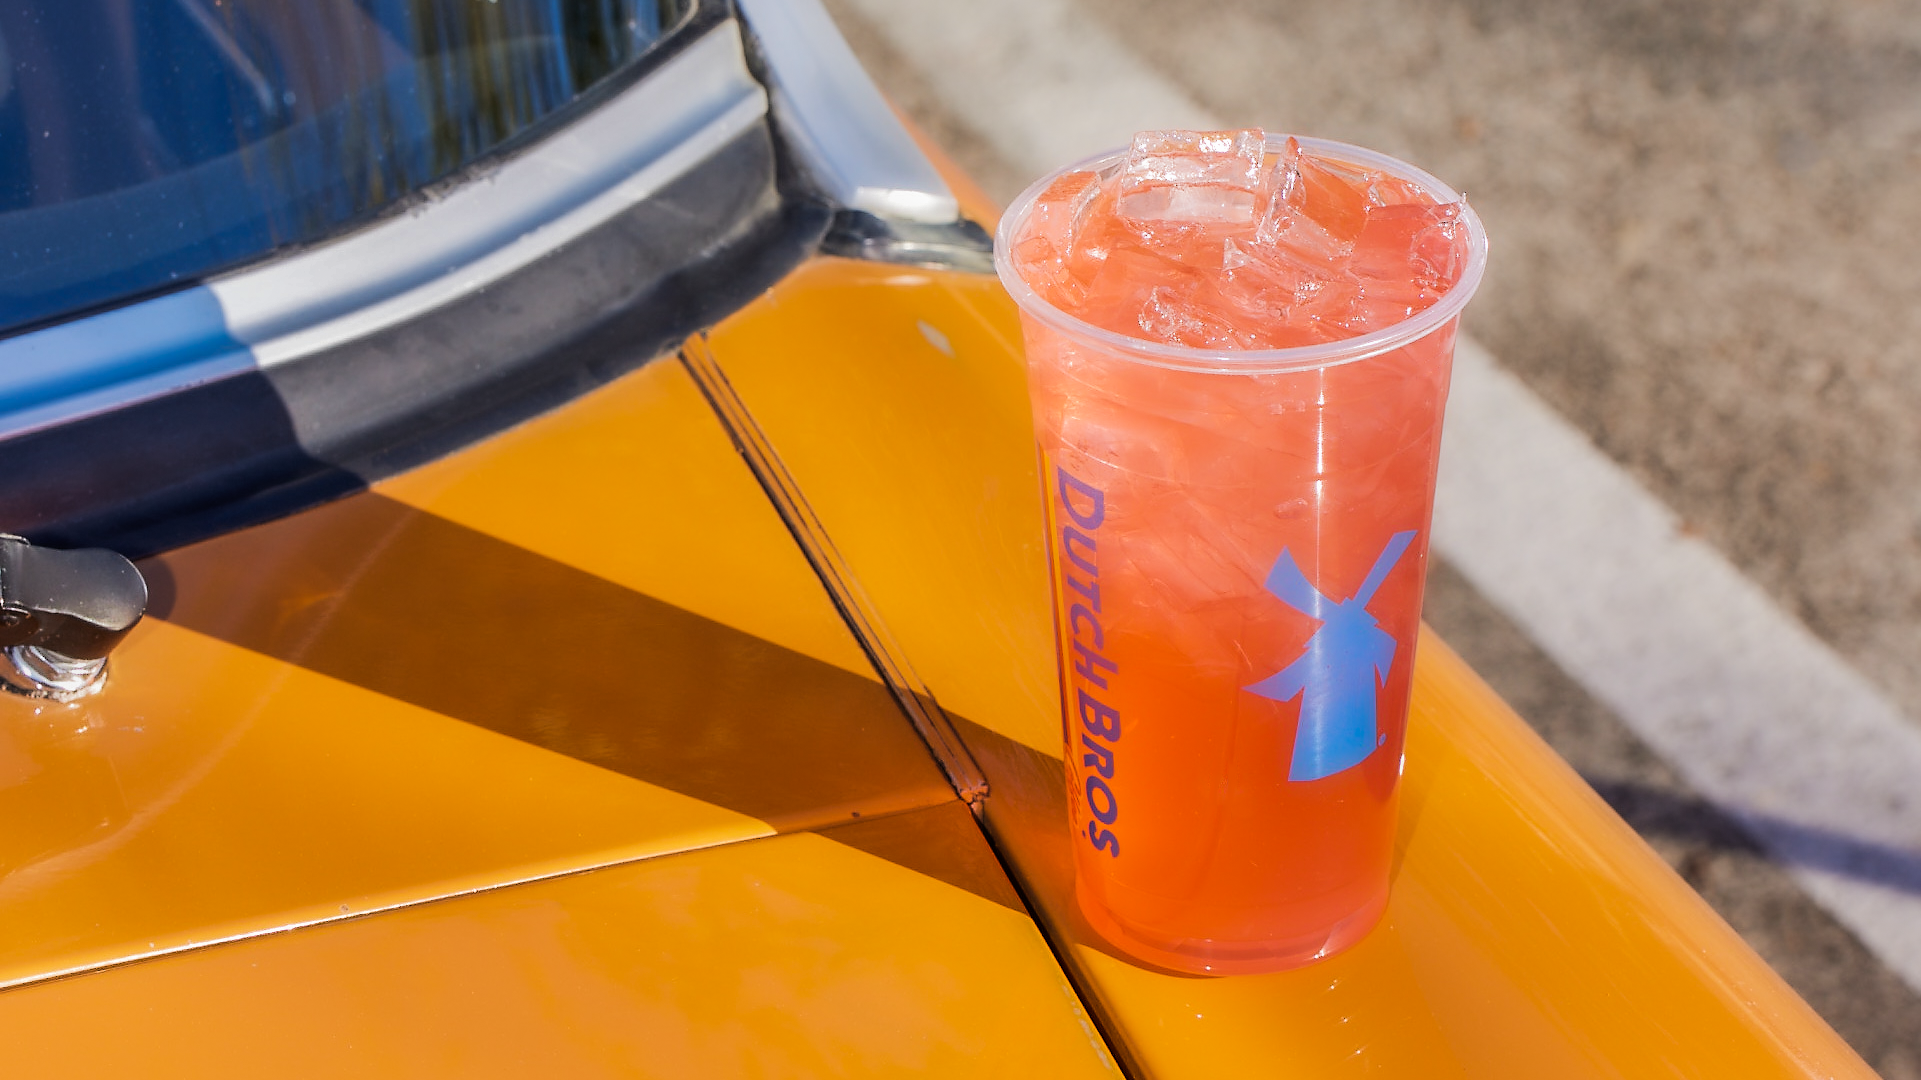 Energize the day at Dutch Bros! Grab an epic coffee or Rebel energy drink. Dutch Bros Coffee Pocatello (541)955-4700